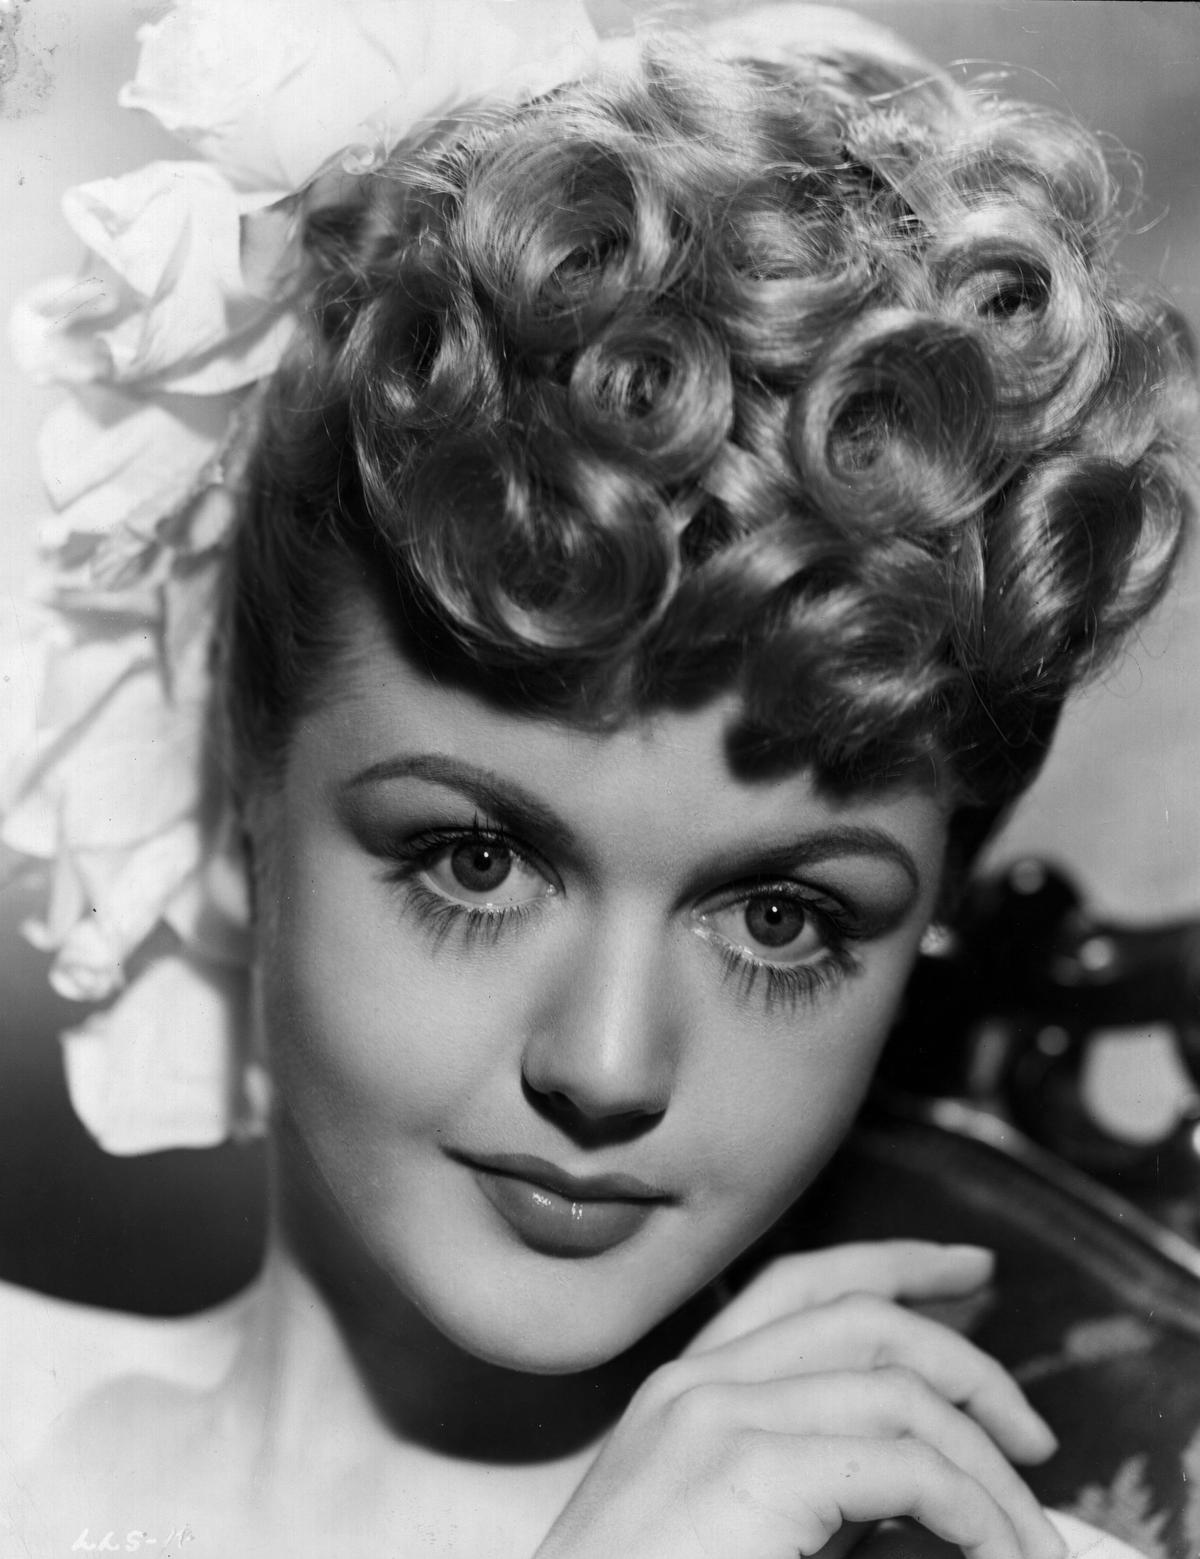 Headshot of the British-American-Irish character actress as a young woman (©Getty Images | <a href="https://www.gettyimages.com.au/detail/news-photo/british-character-actress-angela-lansbury-news-photo/2661641">Hulton Archive</a>)